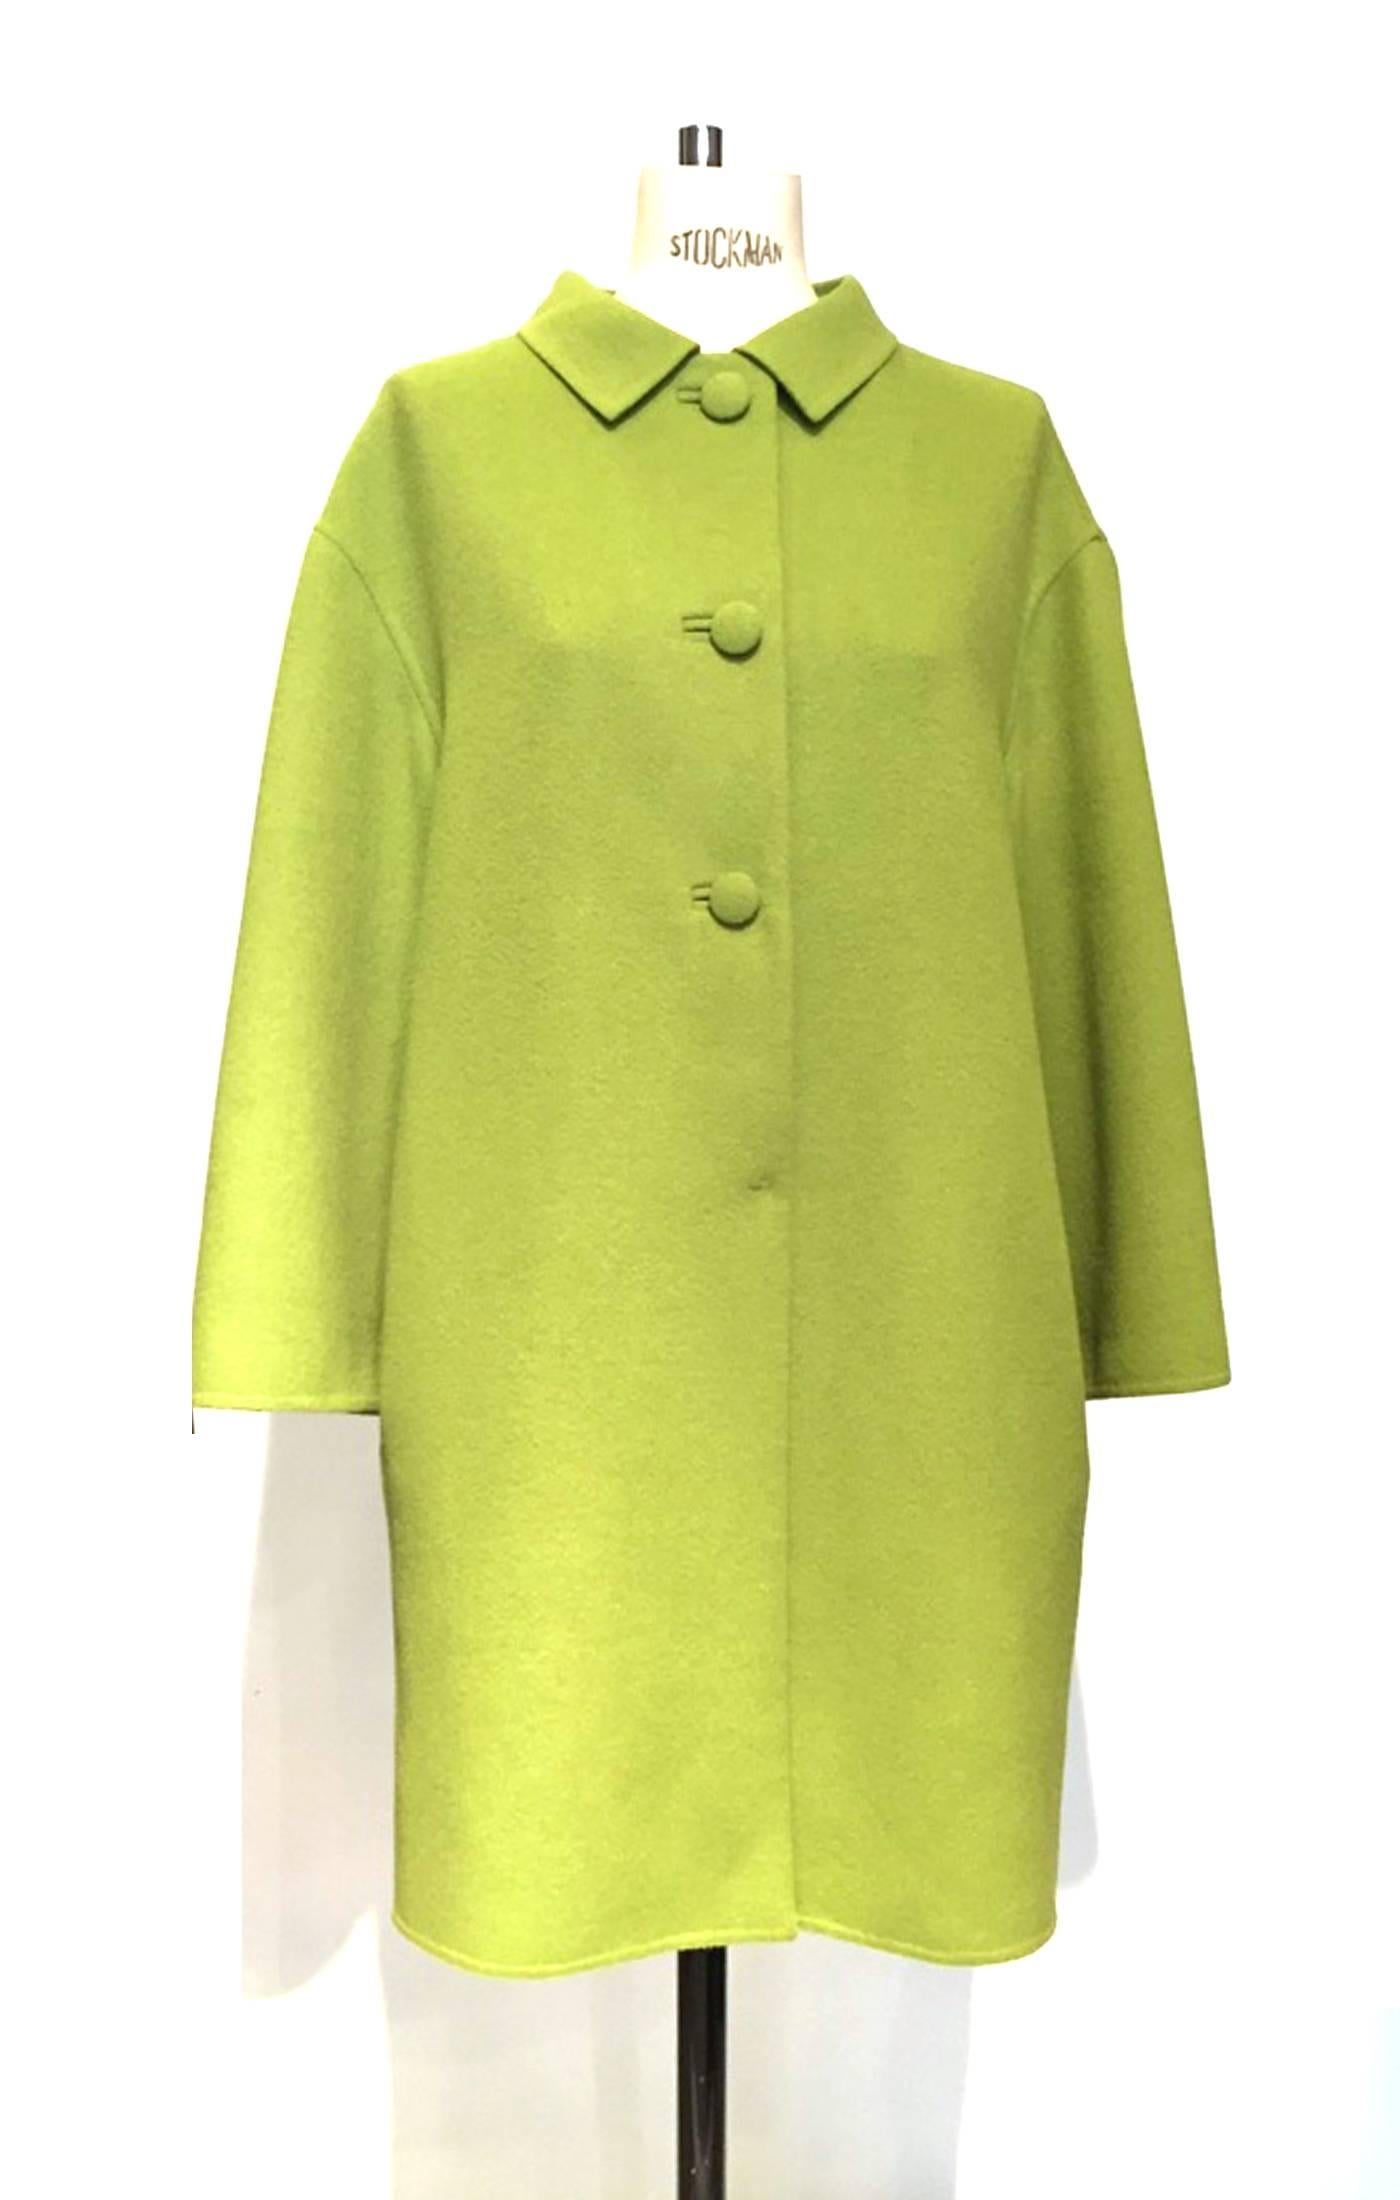 Prada green wool coat with 3 buttons closure in front in a beautiful light green colour, a true dream piece from Prada!